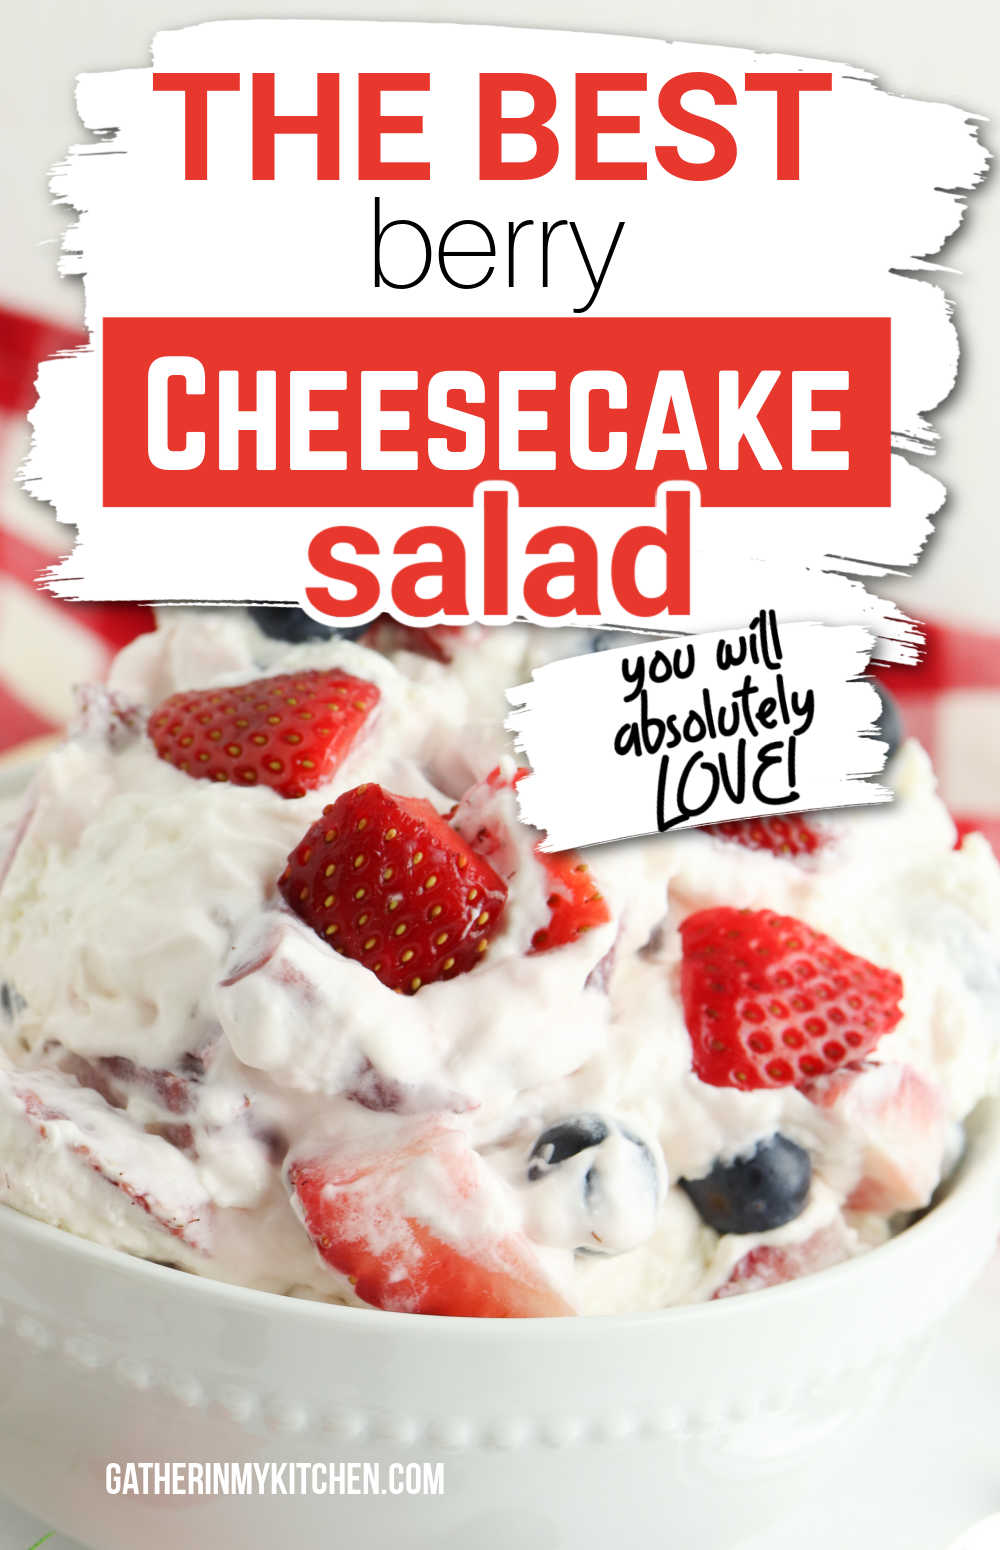 Pin image: top says "The best berry cheesecake salad: you will absolutely love!" and the bottom has a closeup pic of berry cheesecake salad in a bowl.